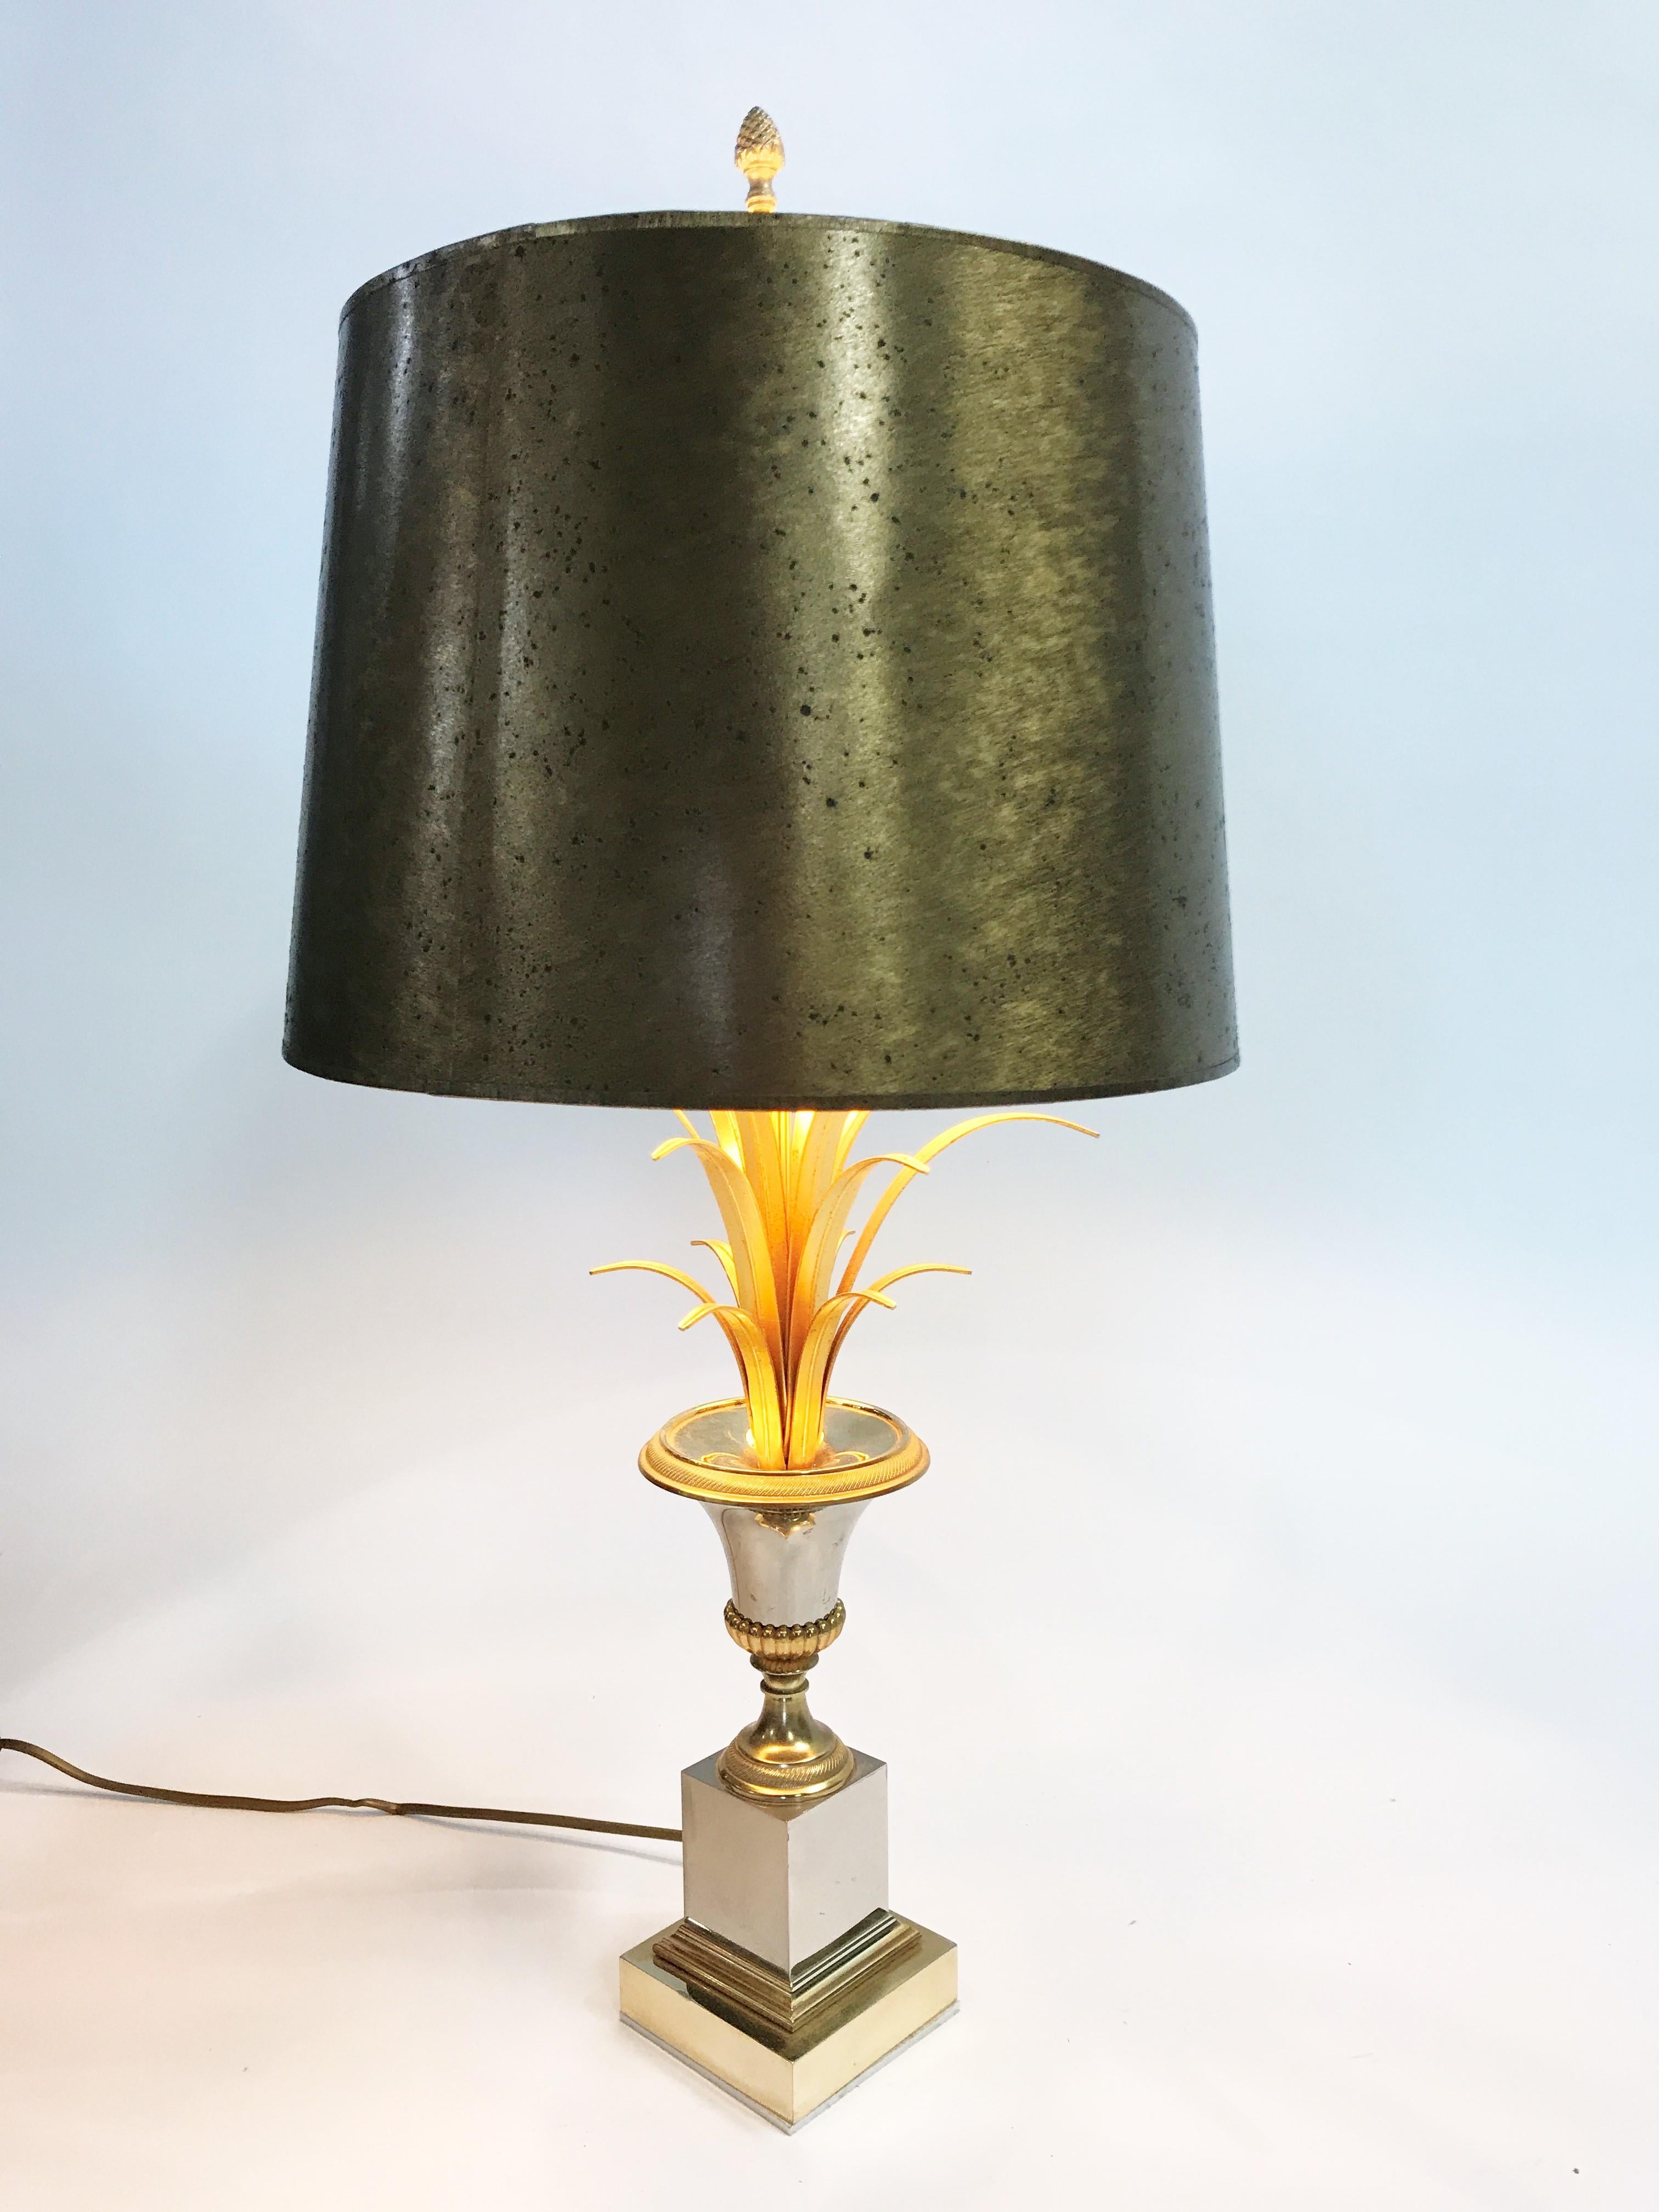 Pineapple leaf table lamp by Boulanger attribute to Maison Charles.

This Regency style lamp is also known as 'lampe vase' and is an attractive design from the 1960s.

The three lightpoint lamp is made from chrome and brass which shows lovely